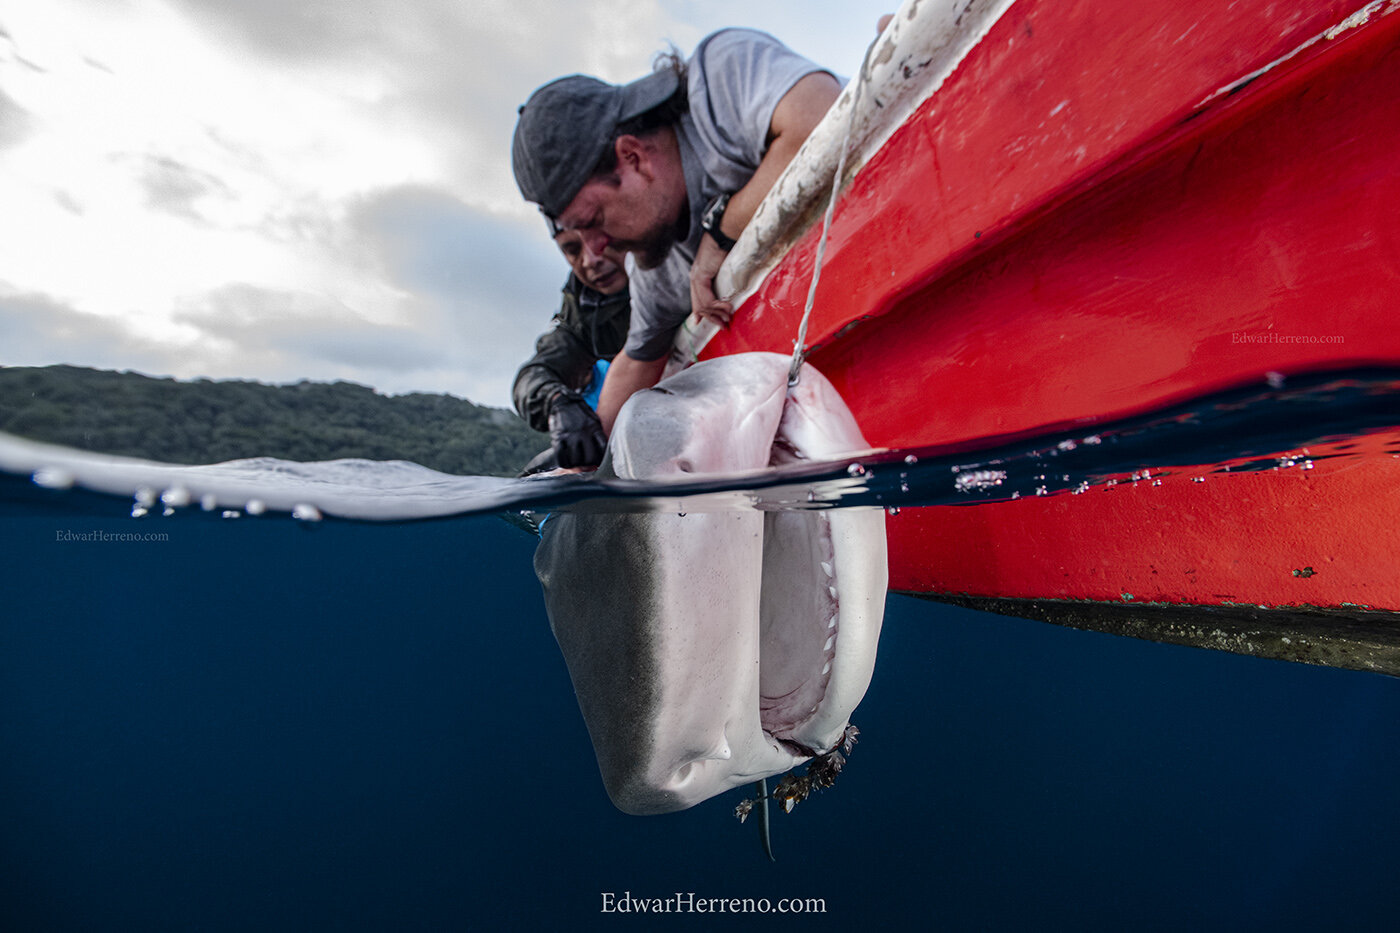 Scientist from MIGRAMAR are installing acoustic & satellite tags and a CAT (video camera) on a tiger shark - Cocos Island.